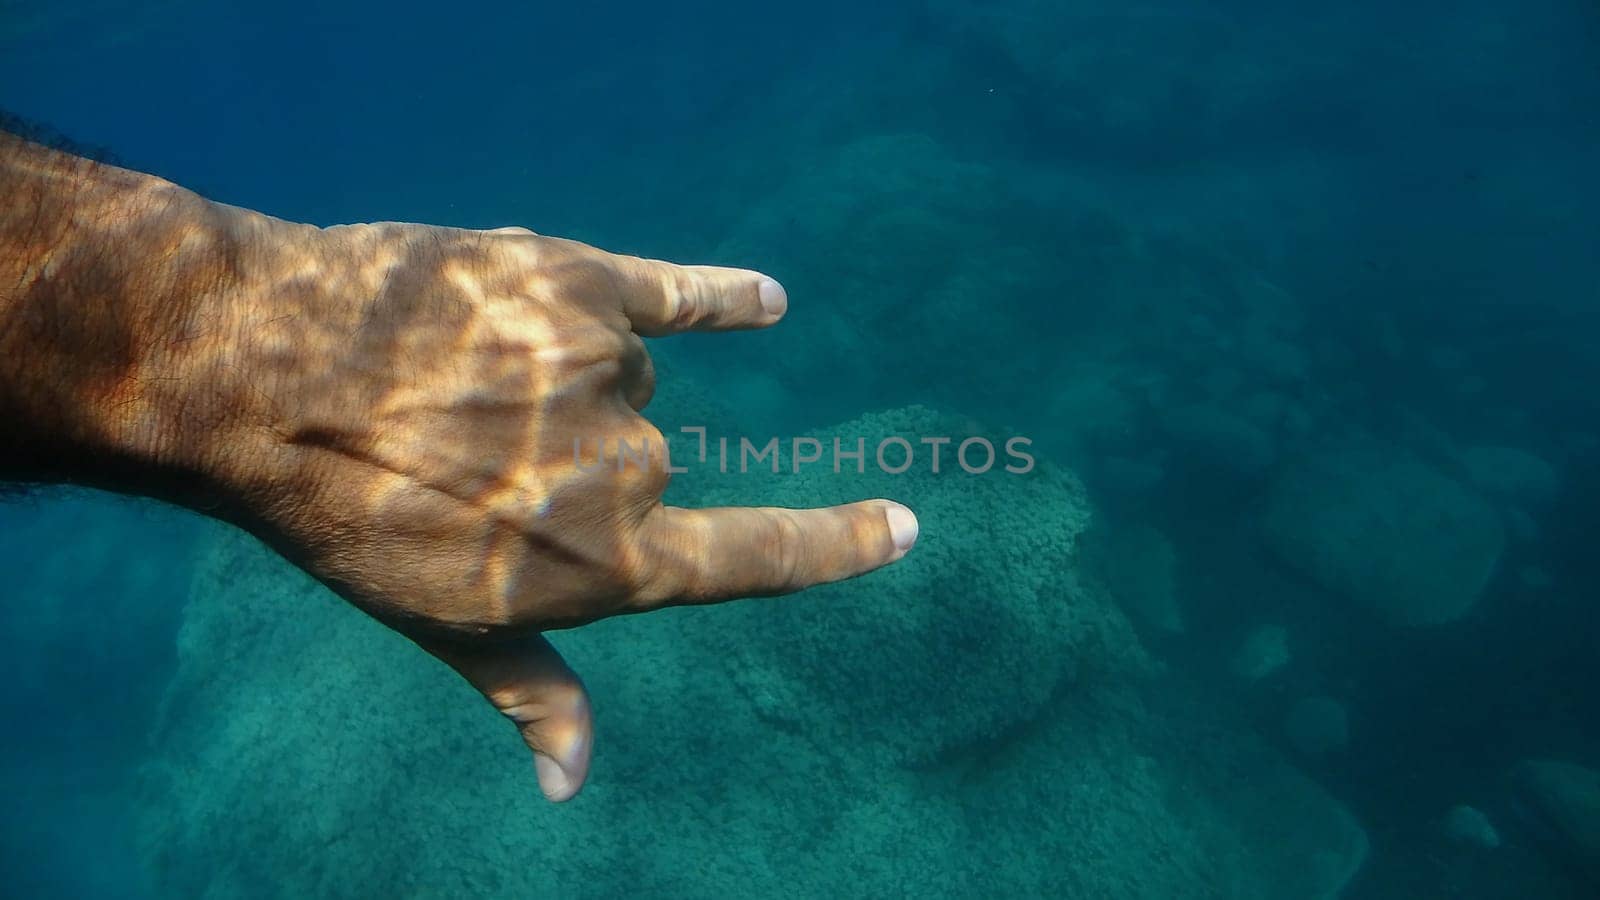 ily sign 3 fingers up human hand underwater detail close up